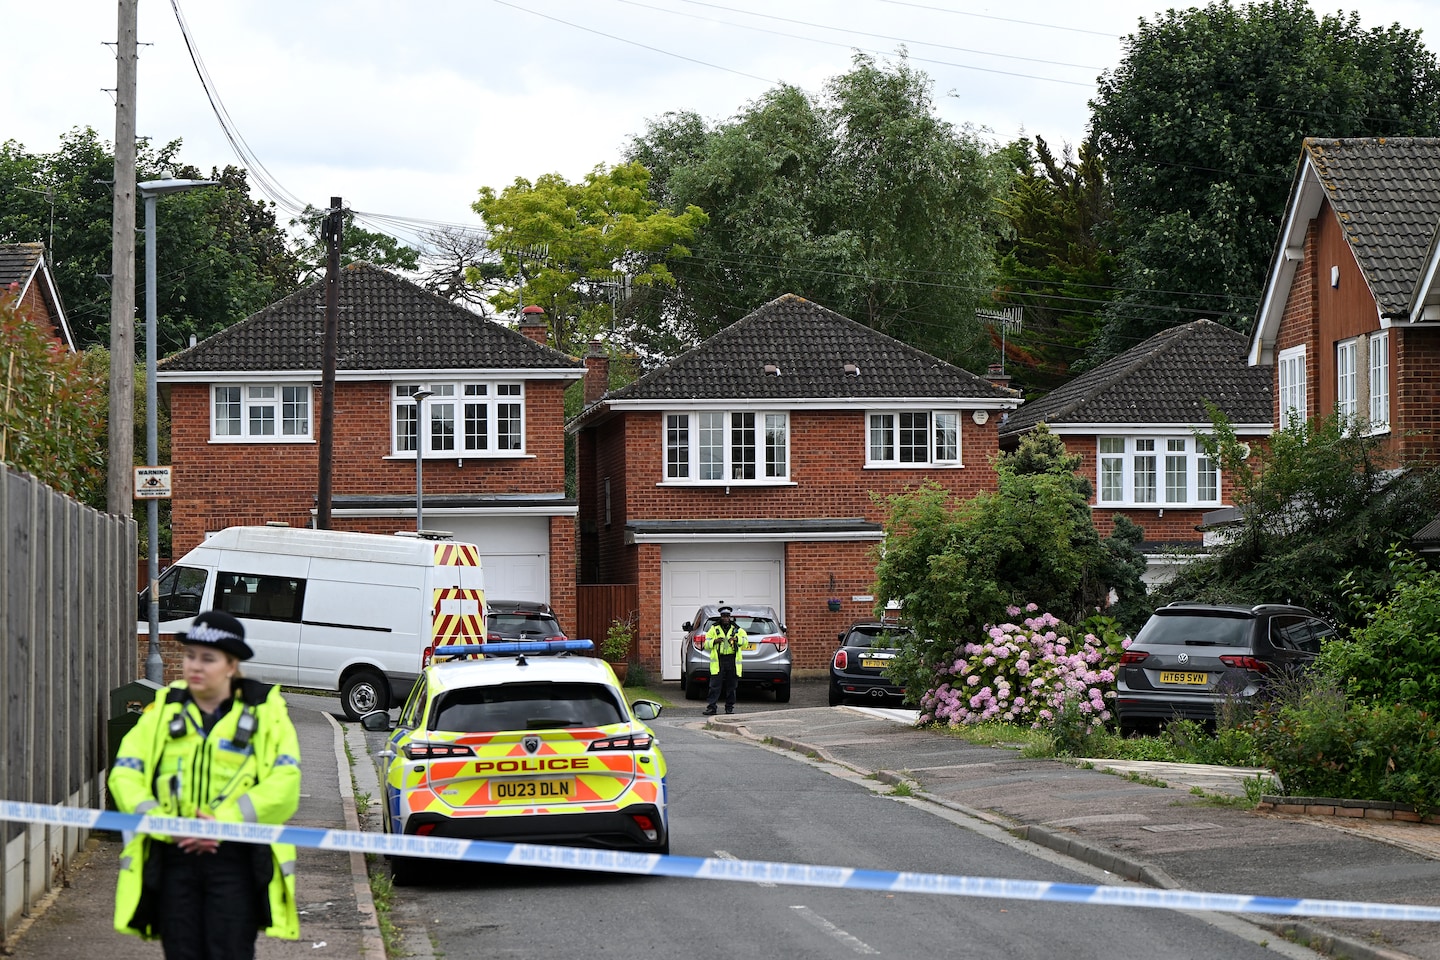 Suspected crossbow triple murder leads U.K. police to launch manhunt